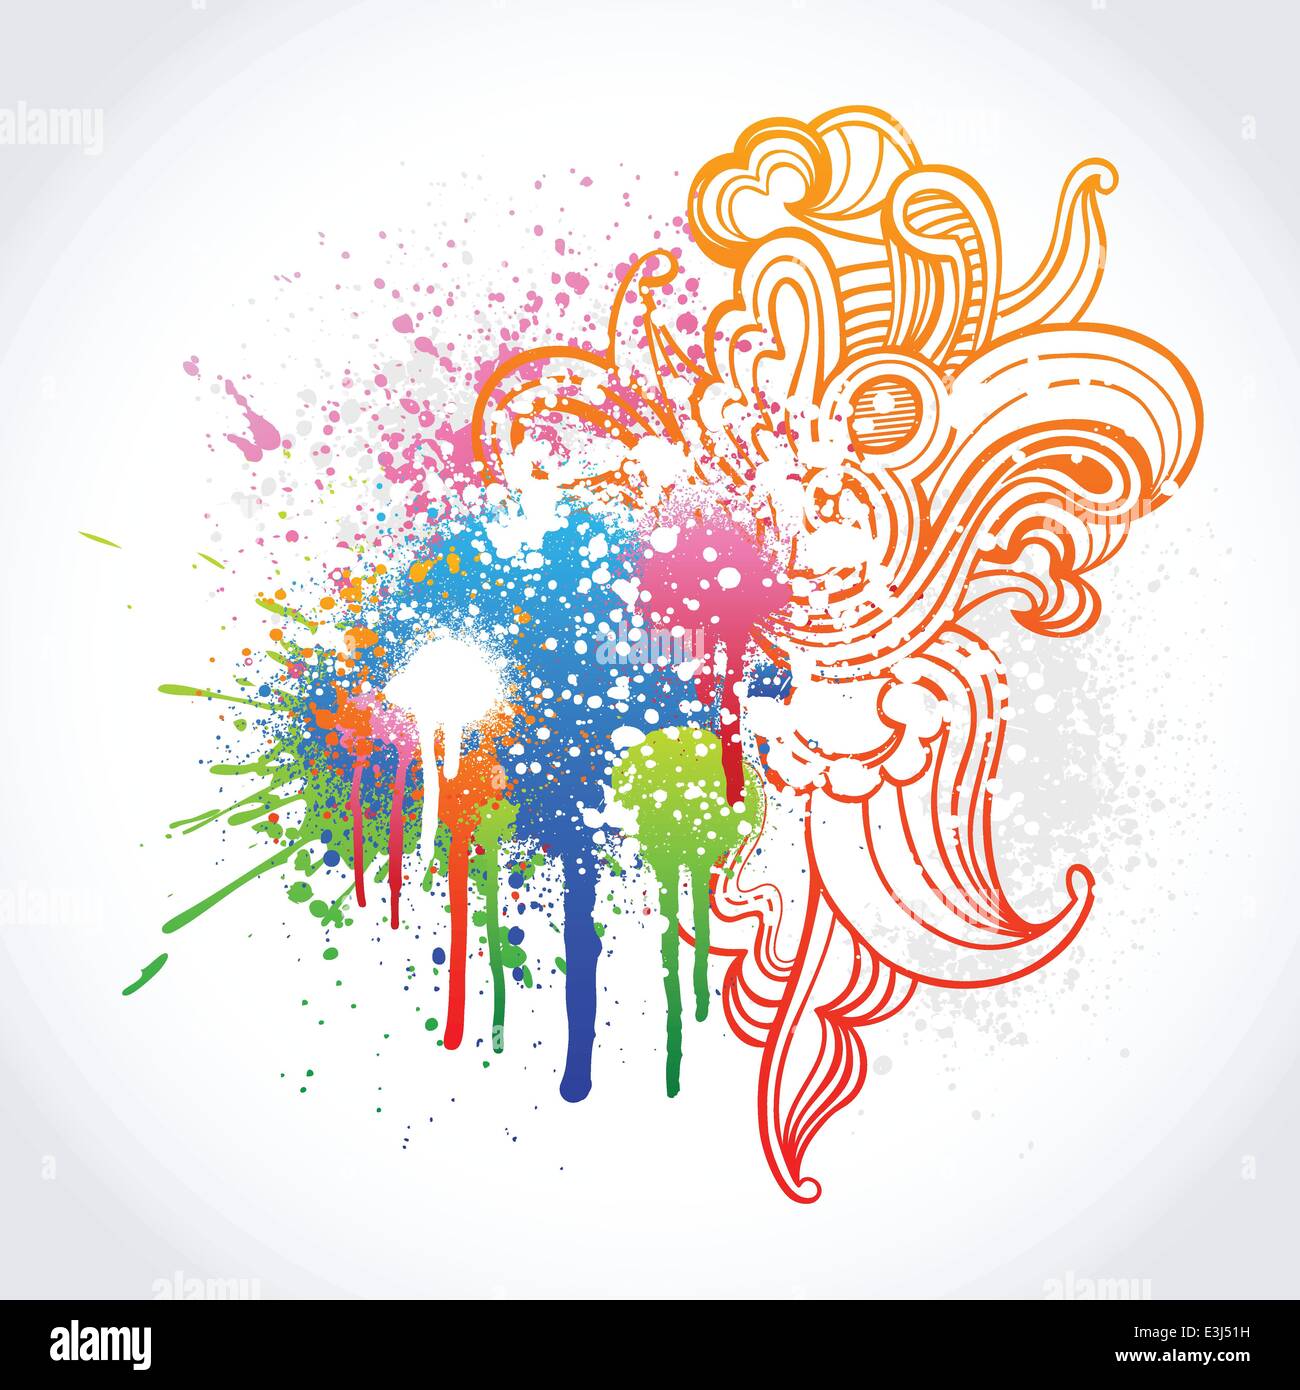 Colorful swirl sketch with grunge paint splatter Stock Vector